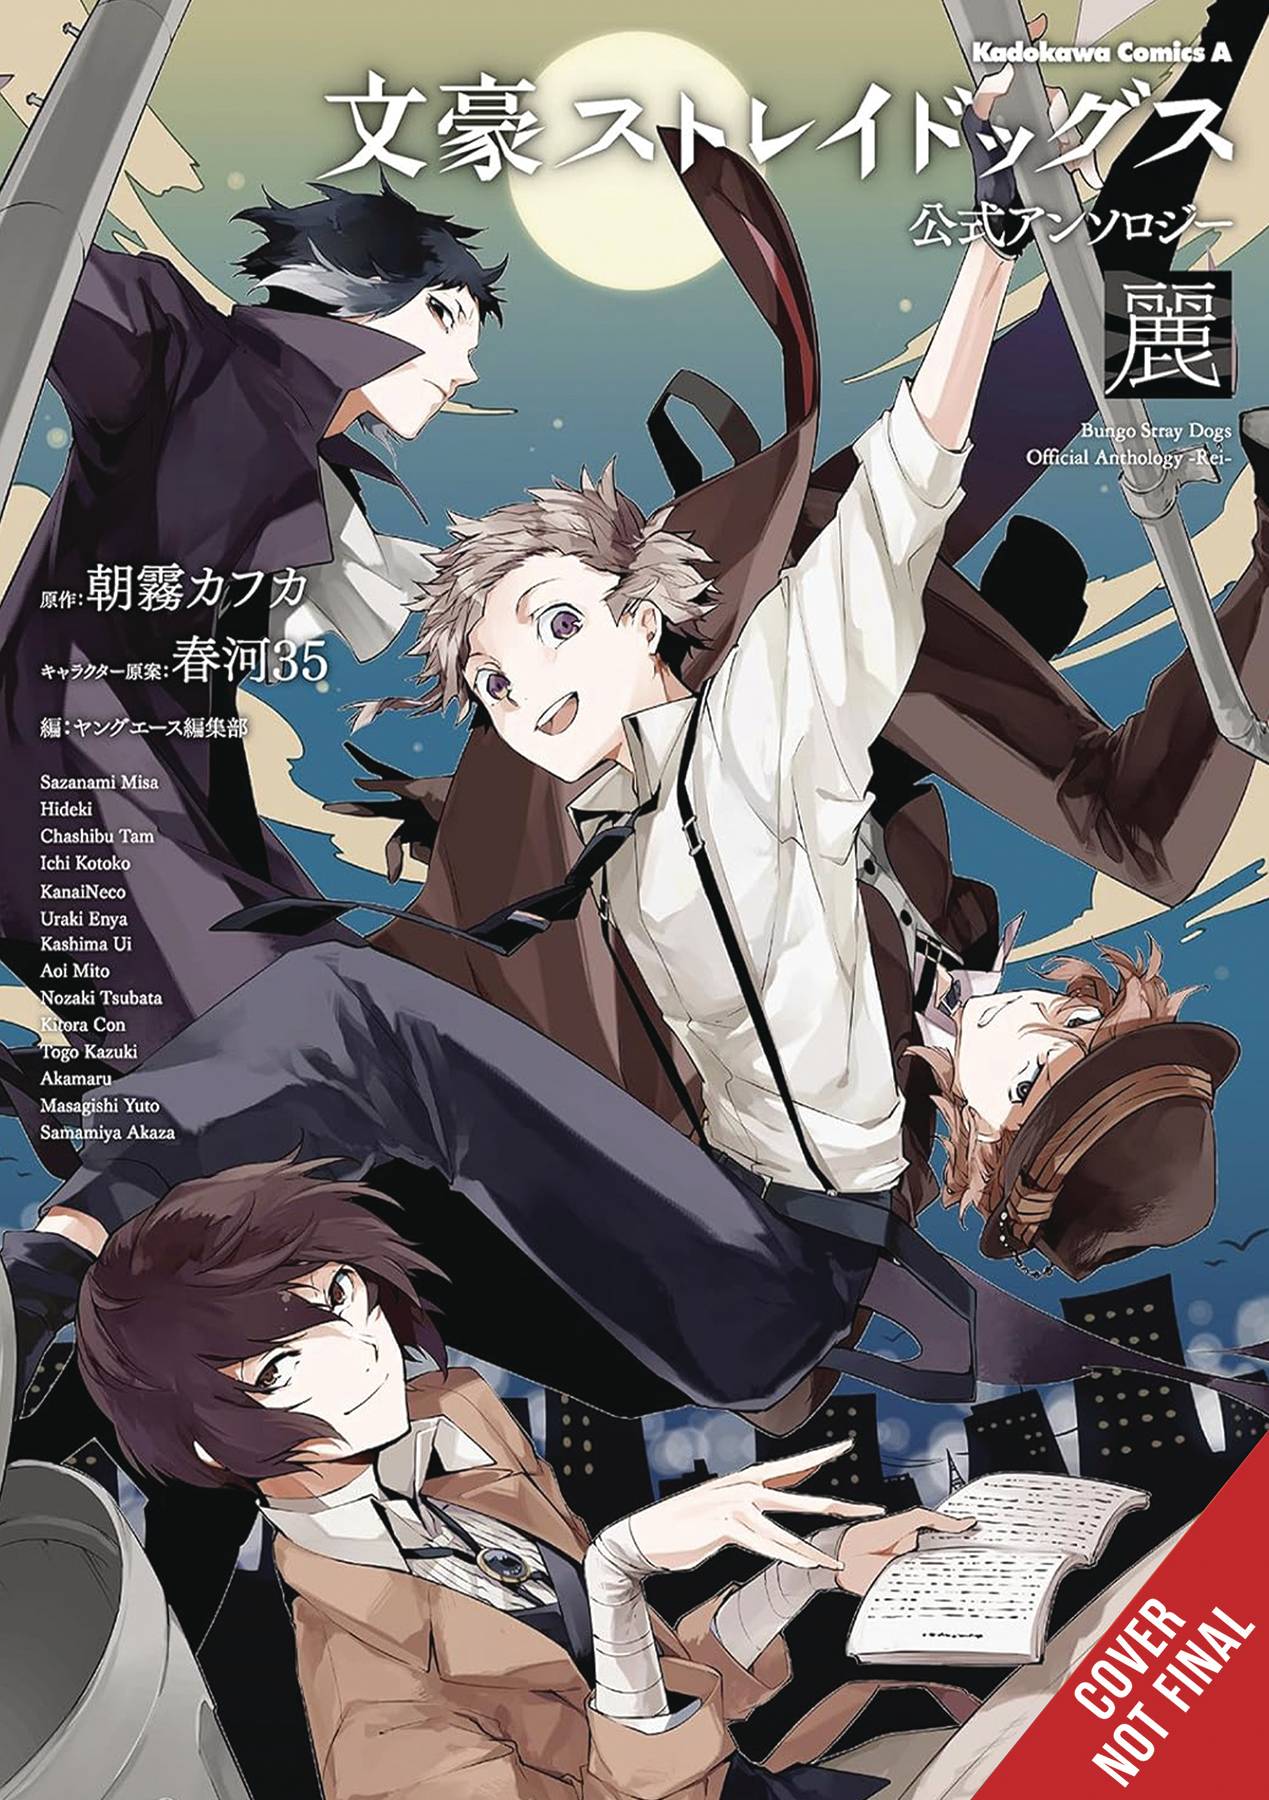 BUNGO STRAY DOGS OFFICIAL COMIC ANTHOLOGY GN VOL 01 (C: 0-1-